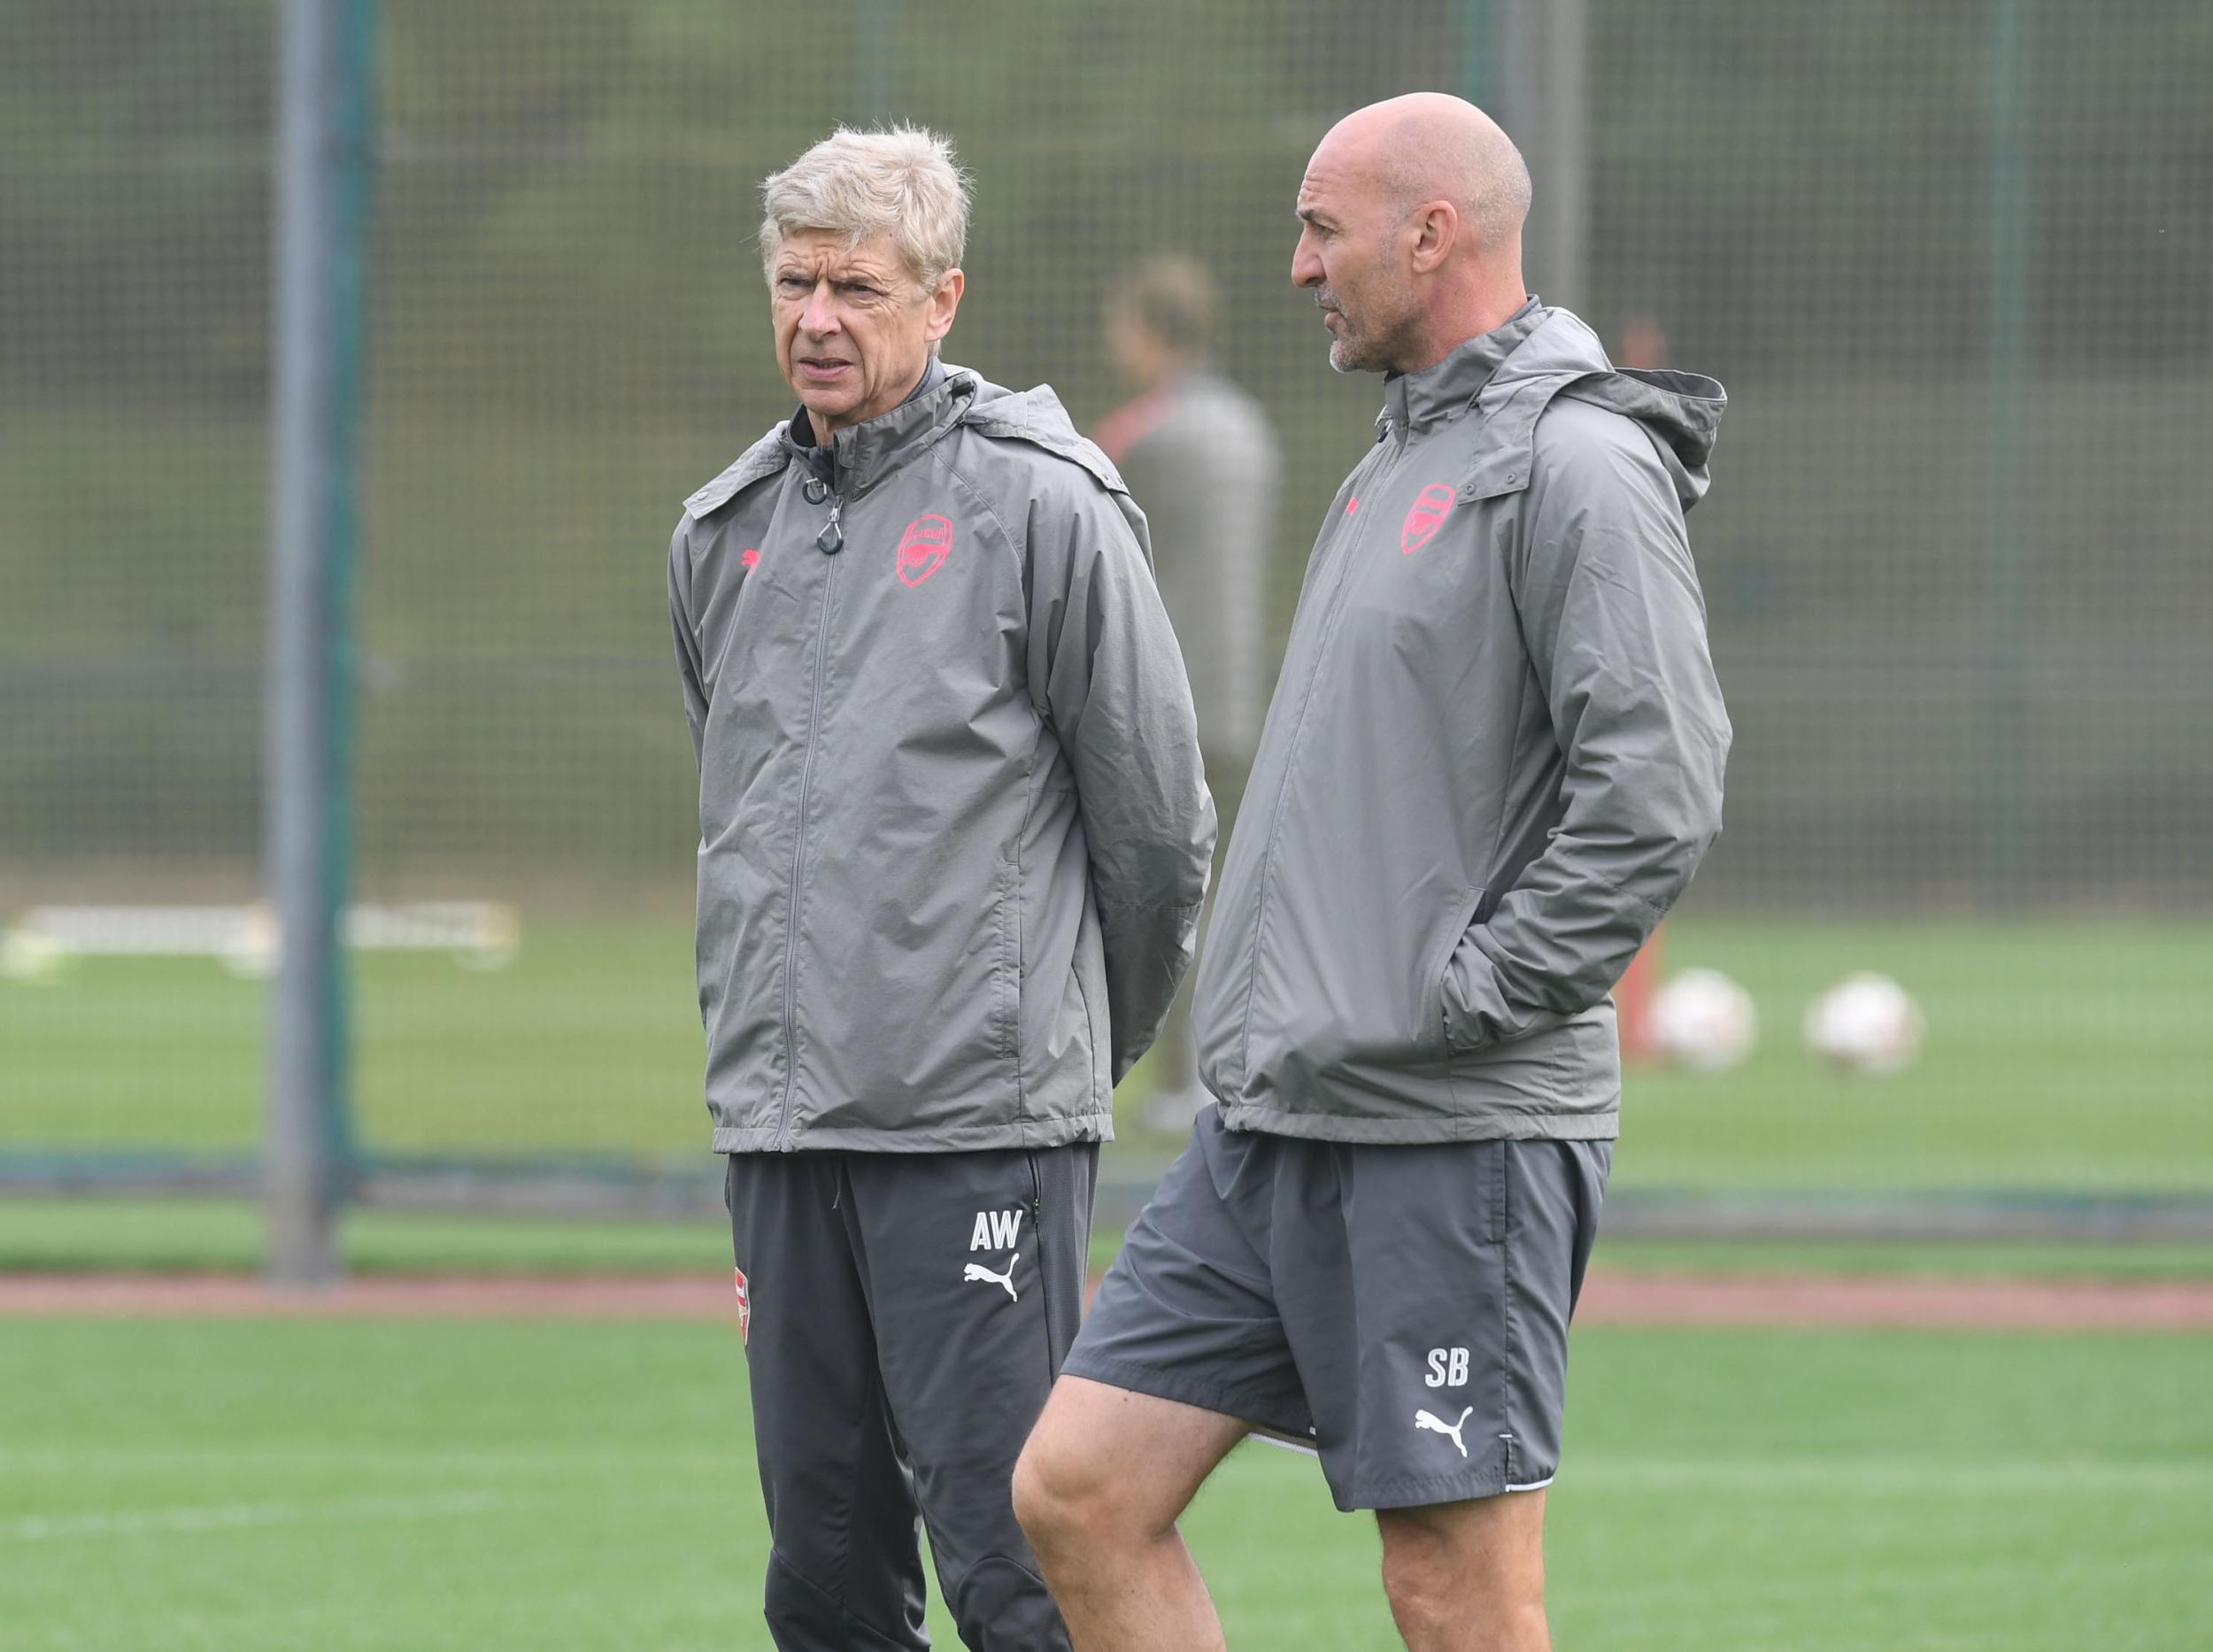 Bould stepped in for Wenger after illness